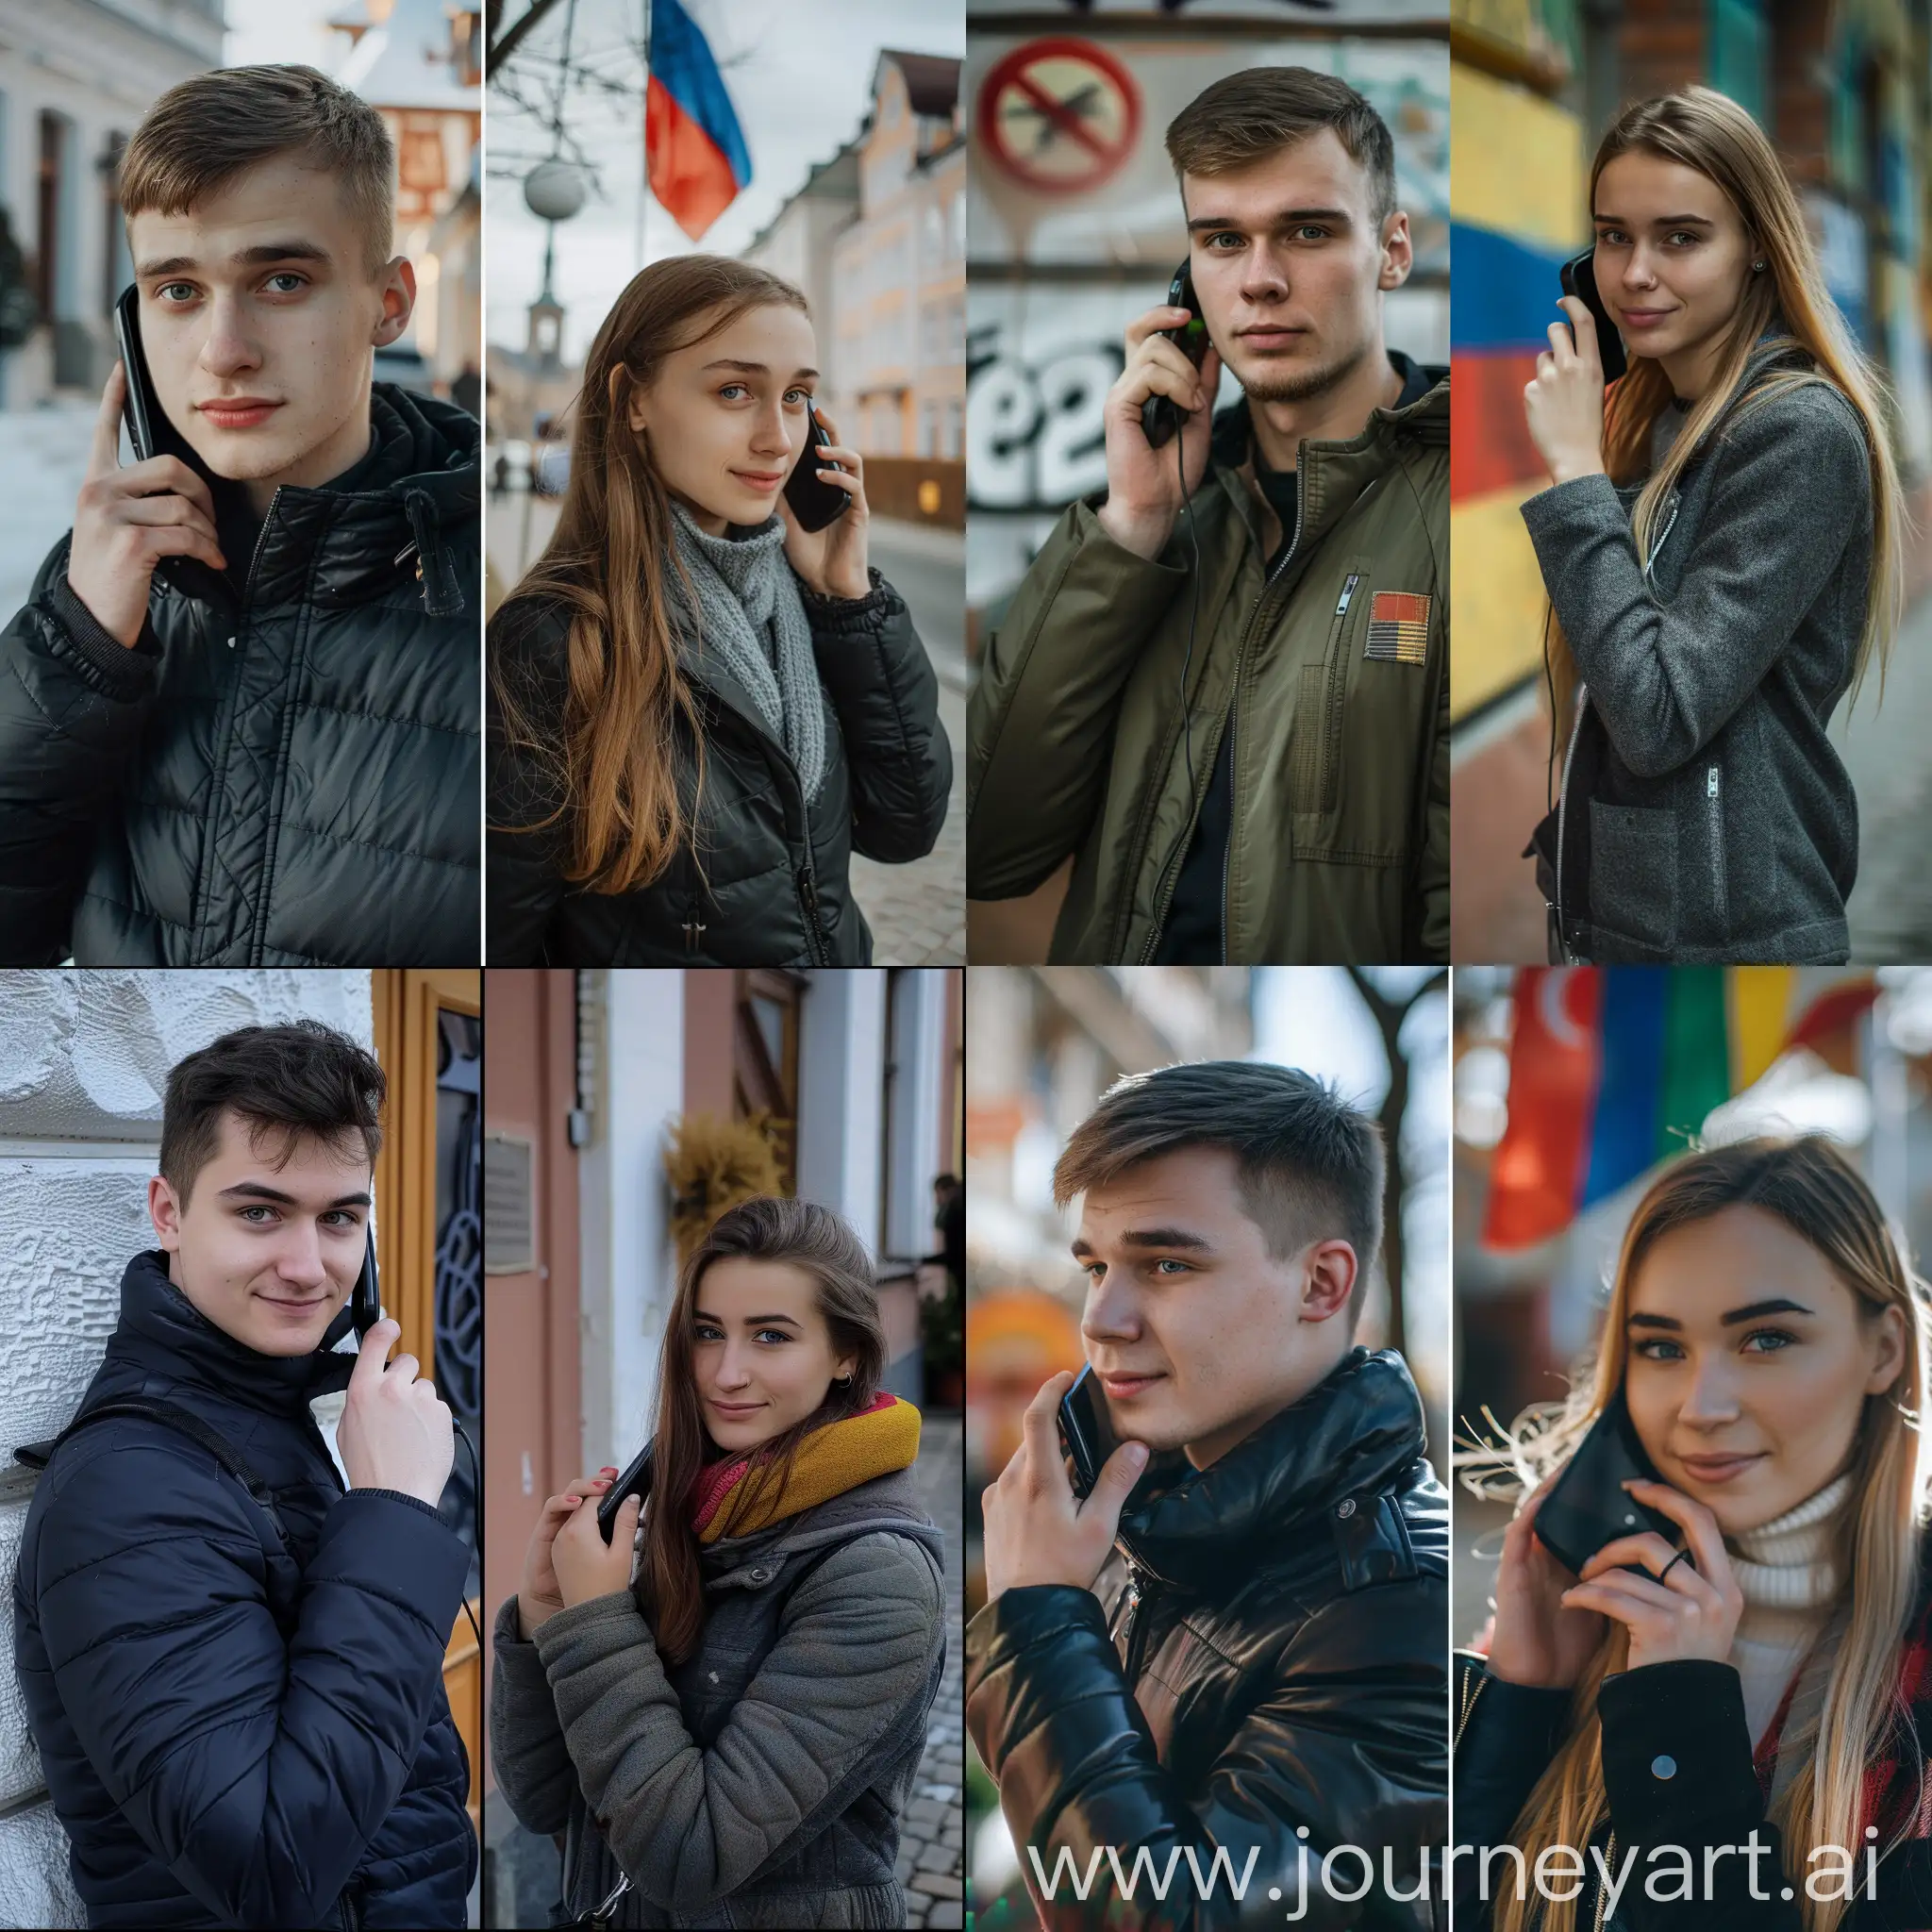 LongDistance-Love-Belarusian-Man-in-Poland-and-Russian-Woman-in-Germany-Cherishing-Connection